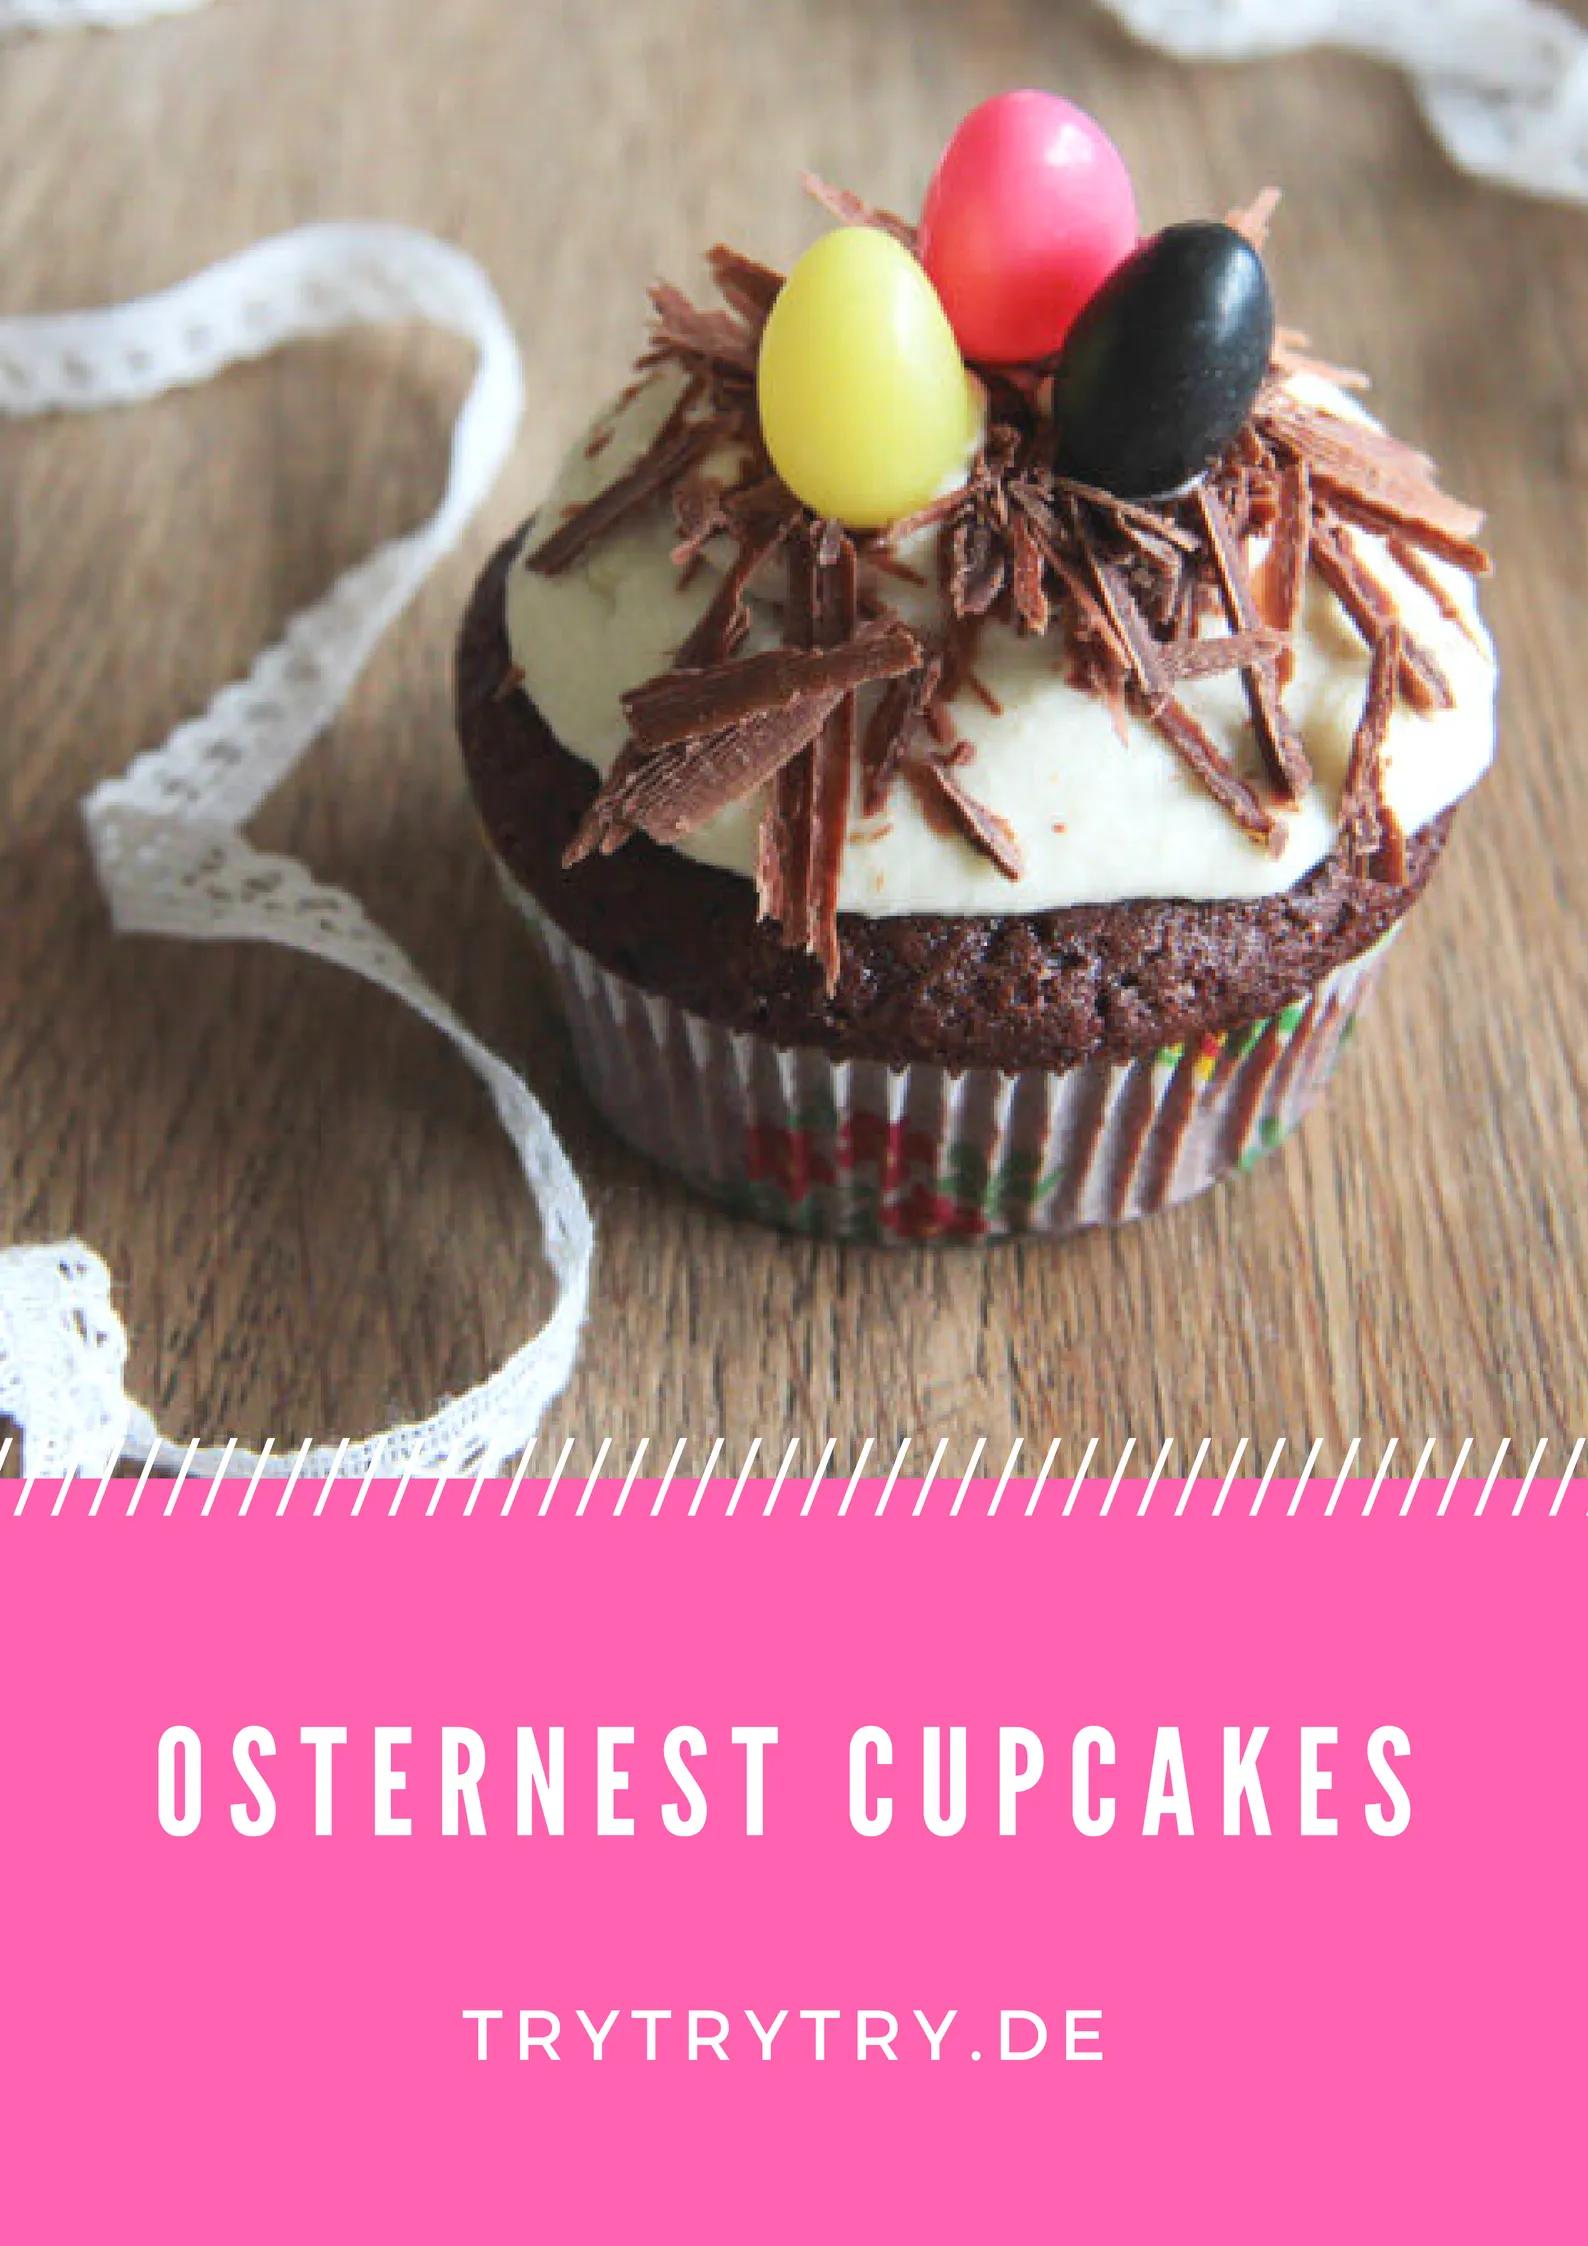 a cupcake with white frosting and chocolate eggs on top is sitting on a ...